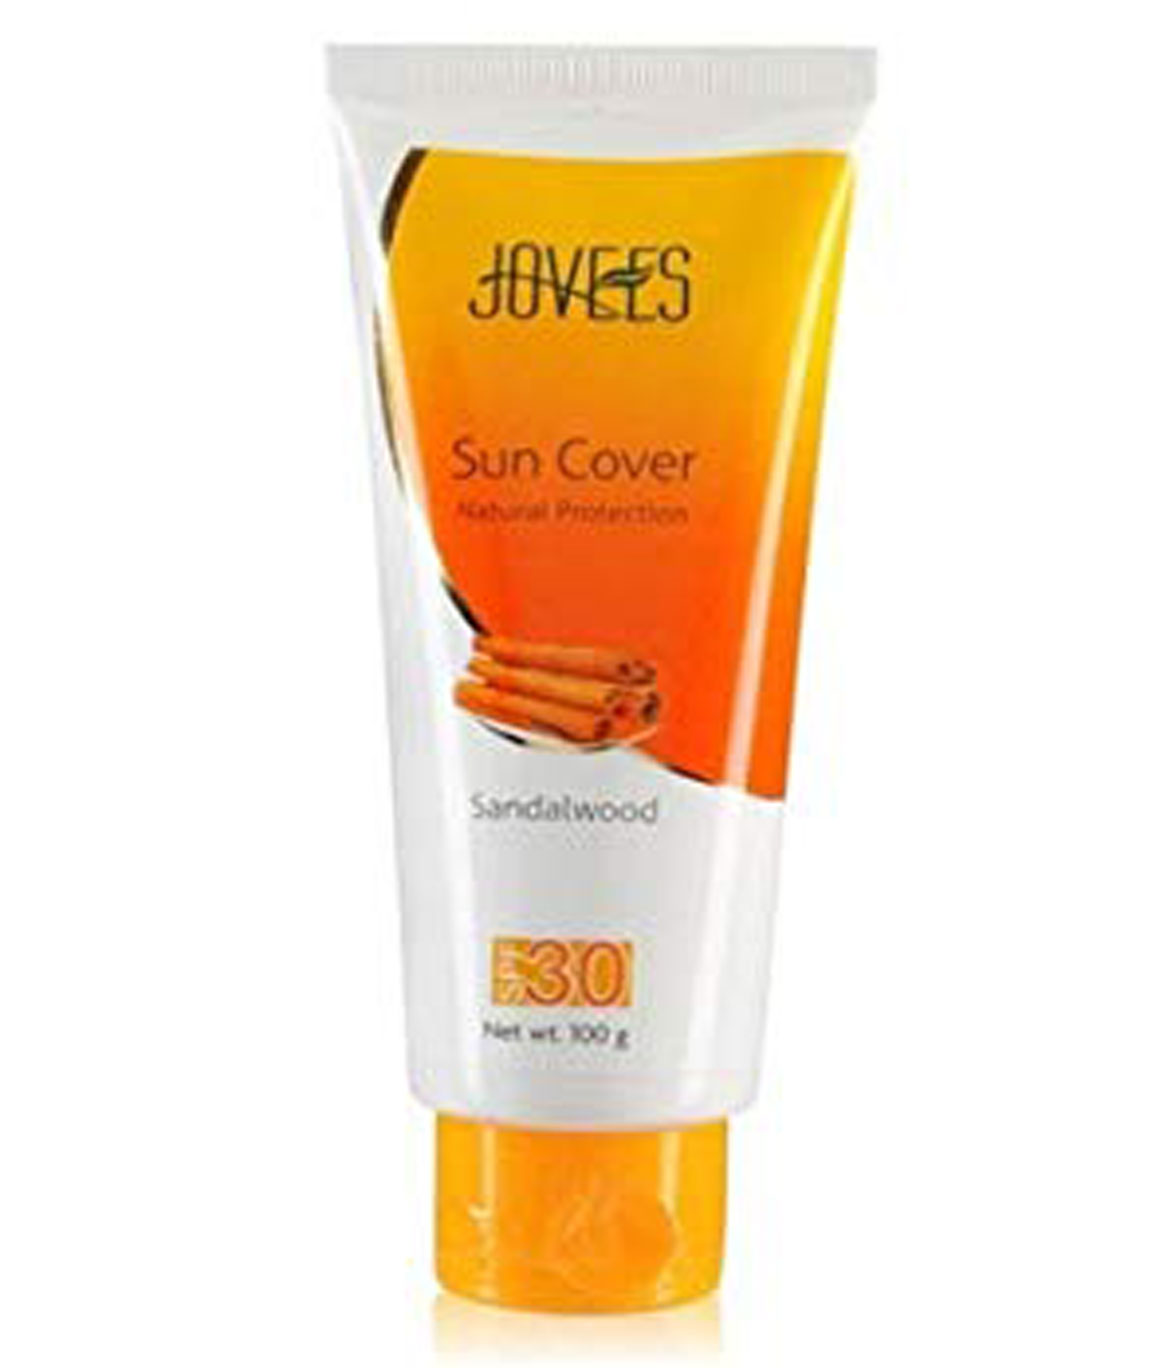 Jovees Sandalwood Suncover Natural Protection SPF 30, 100gm